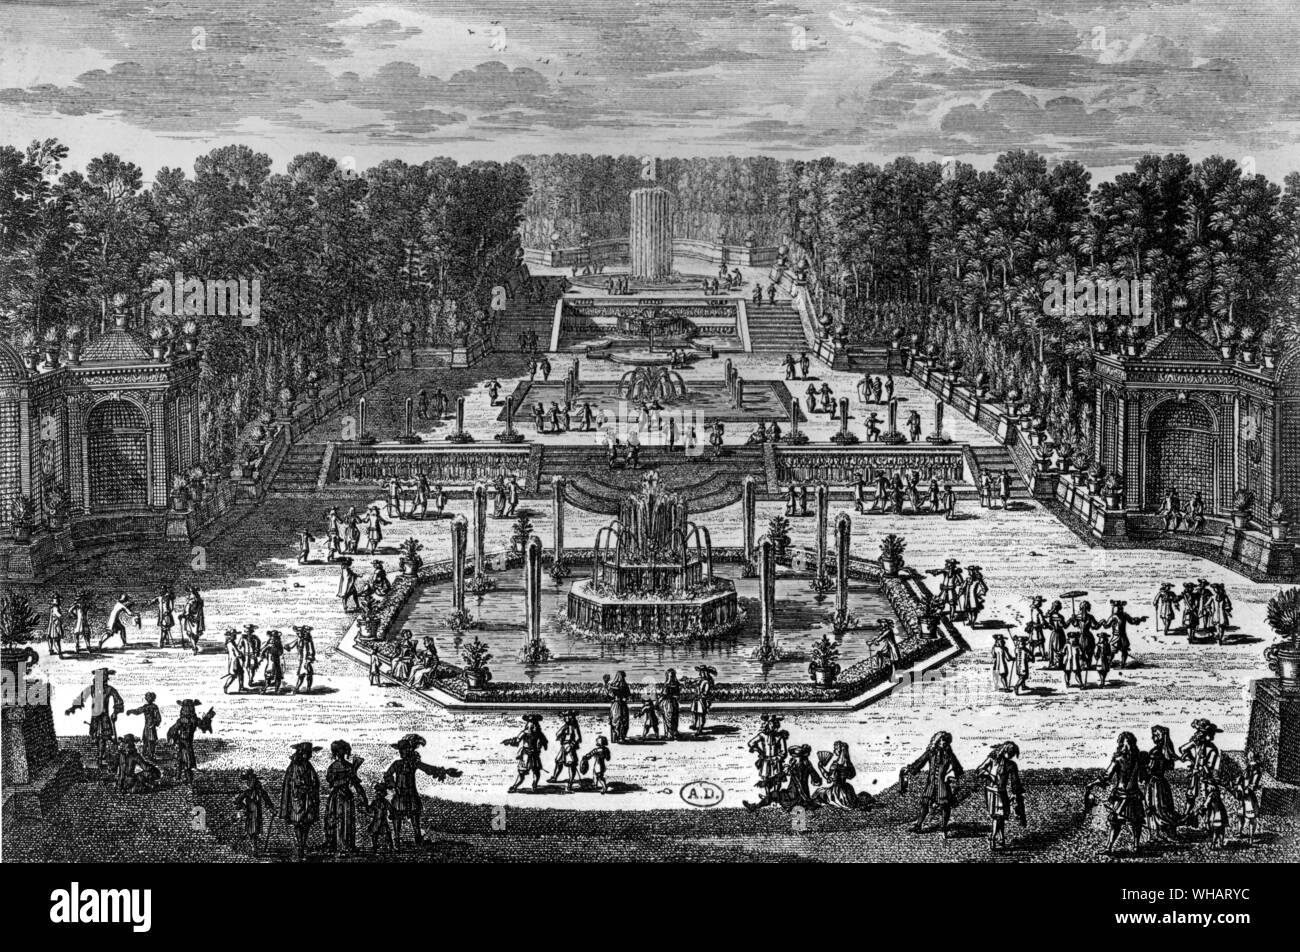 View of the garden of the three fountains in Versaille. It was one of Louis XIV's favorite gardens at his palace of Versailles, a gently sloping grove the size of two football fields, opulently adorned with bronze and marble and three mammoth fountains.. The splendor of Le Bosquet des Trois Fontaines, one of the great landscape achievements of the 17th century, made it that much harder to maintain, and the much-admired garden fell into ruin as history - the French revolution and two World Wars - took its toll on Versailles.. . Stock Photo